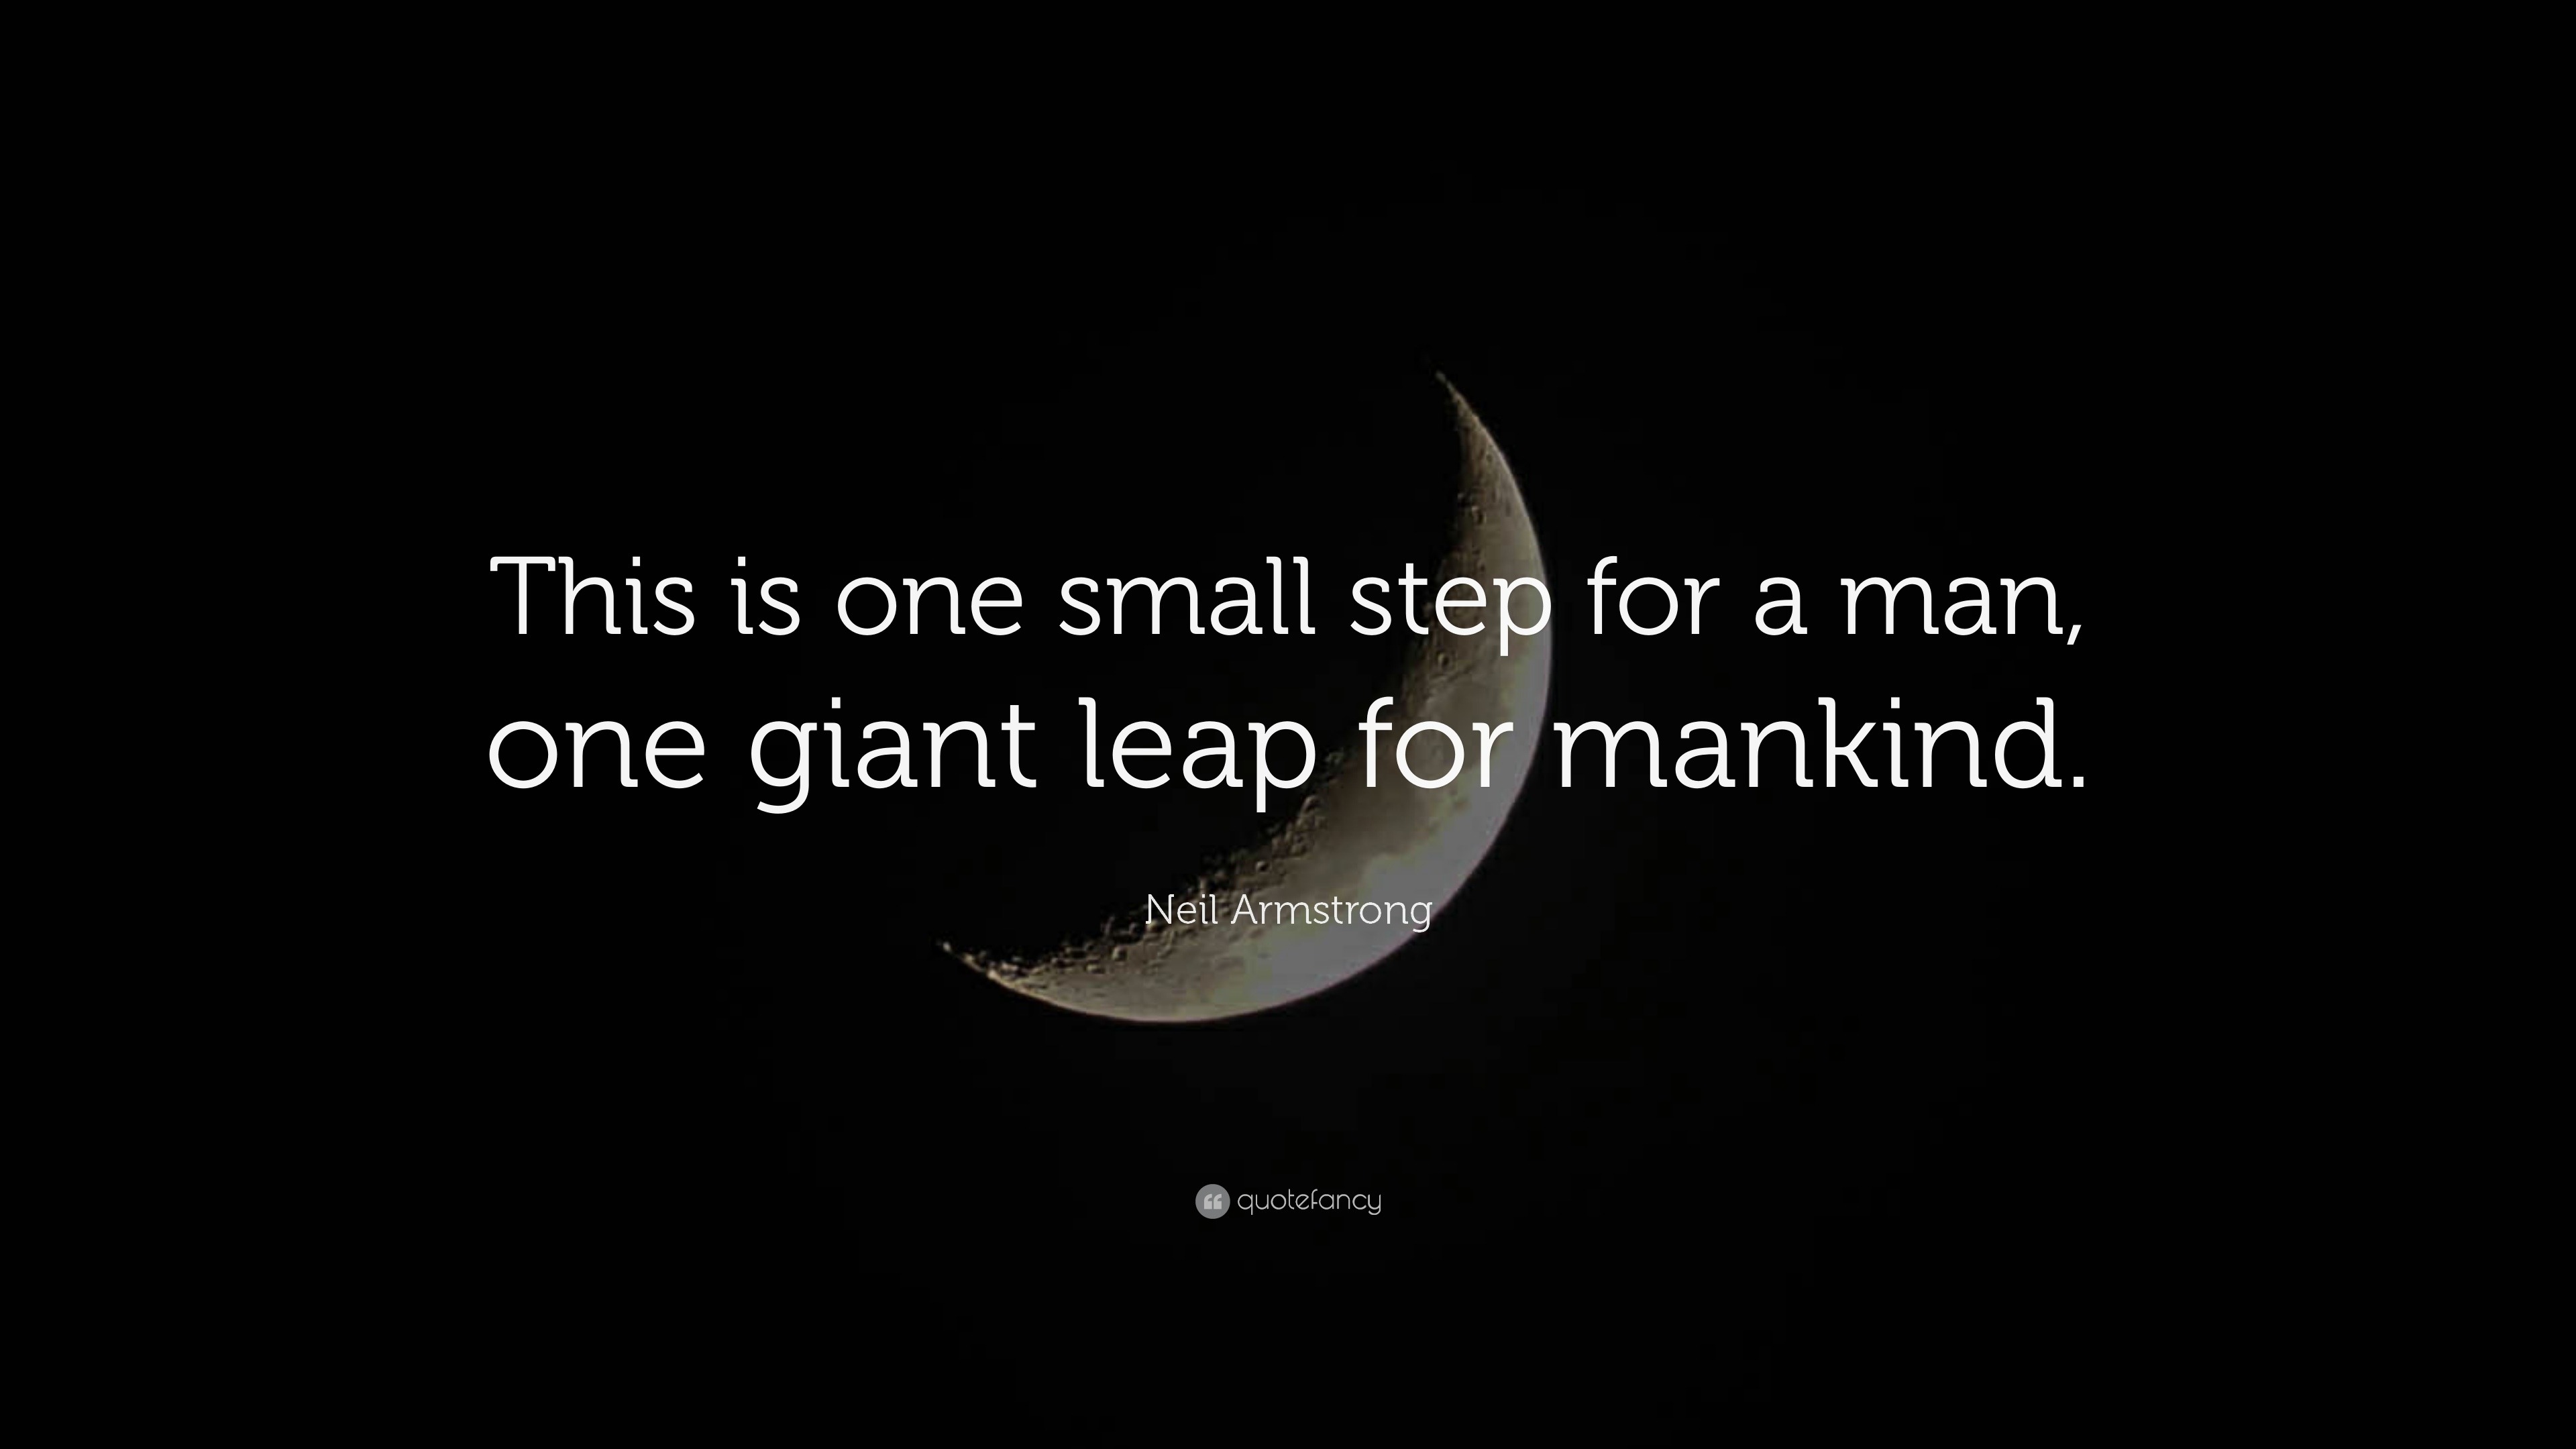 Neil Armstrong Quotes 70 wallpapers Quotefancy